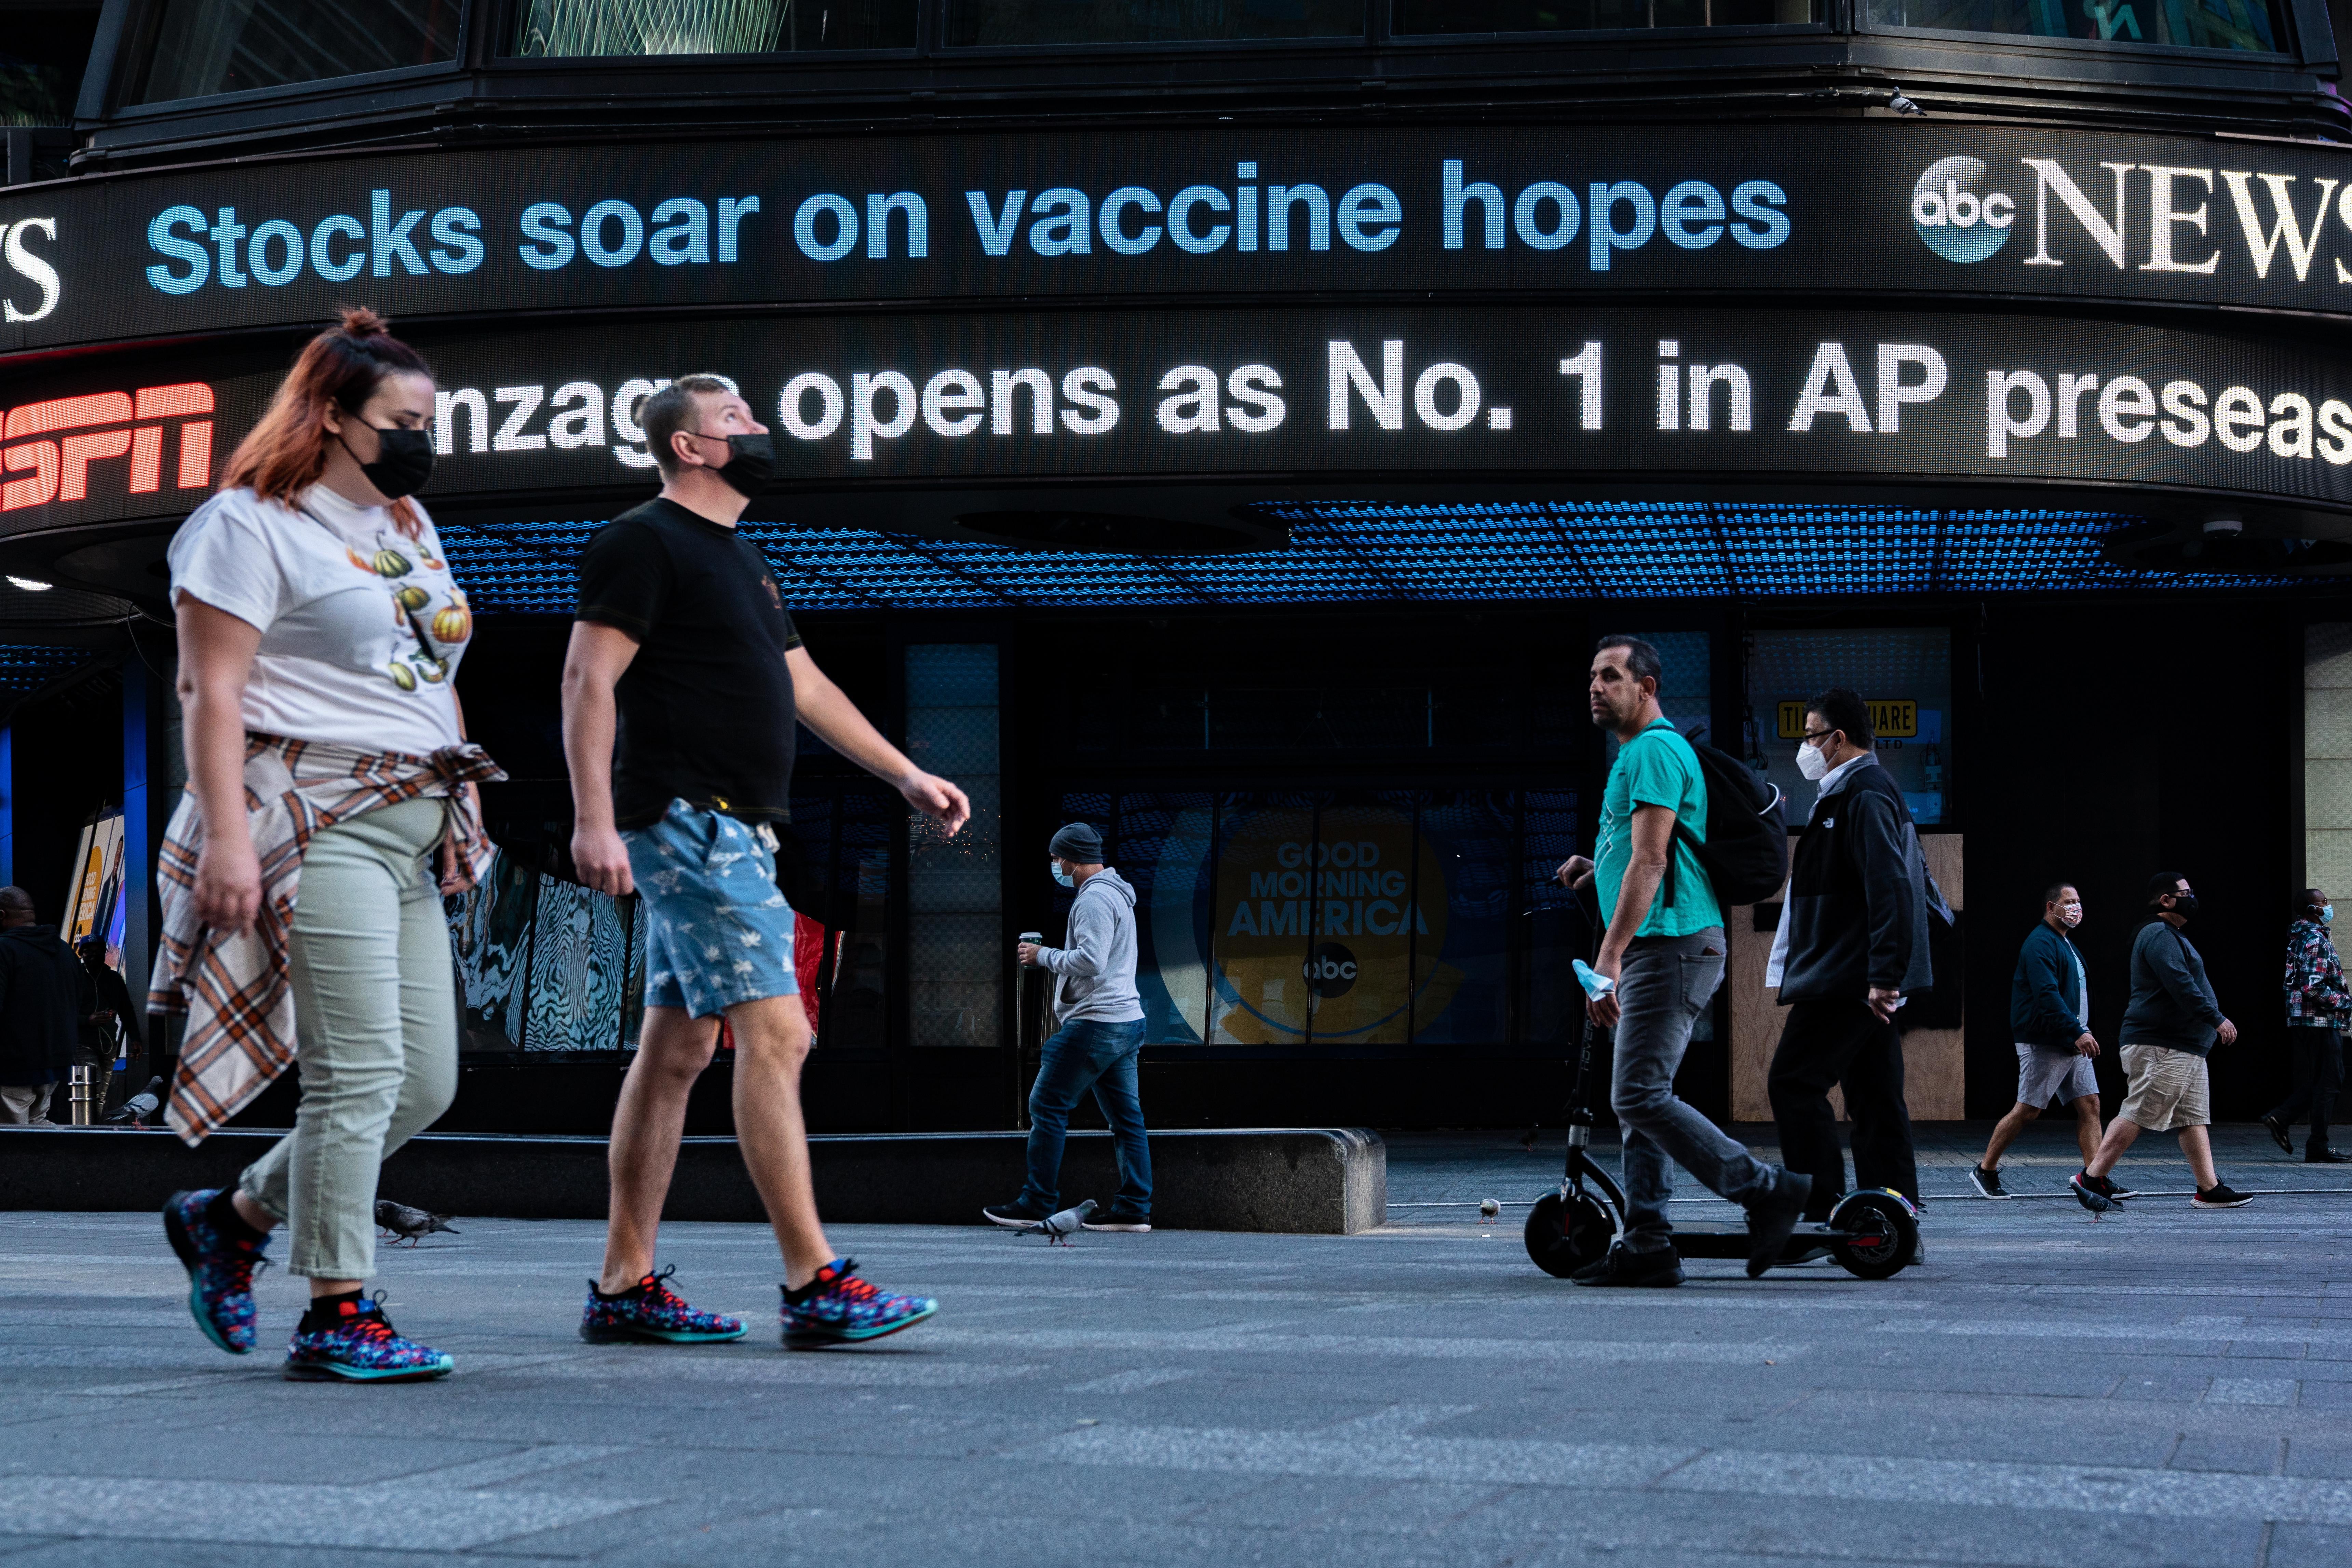 People in masks walk by an ABC News ticker that says "Stocks soar on vaccine hopes."